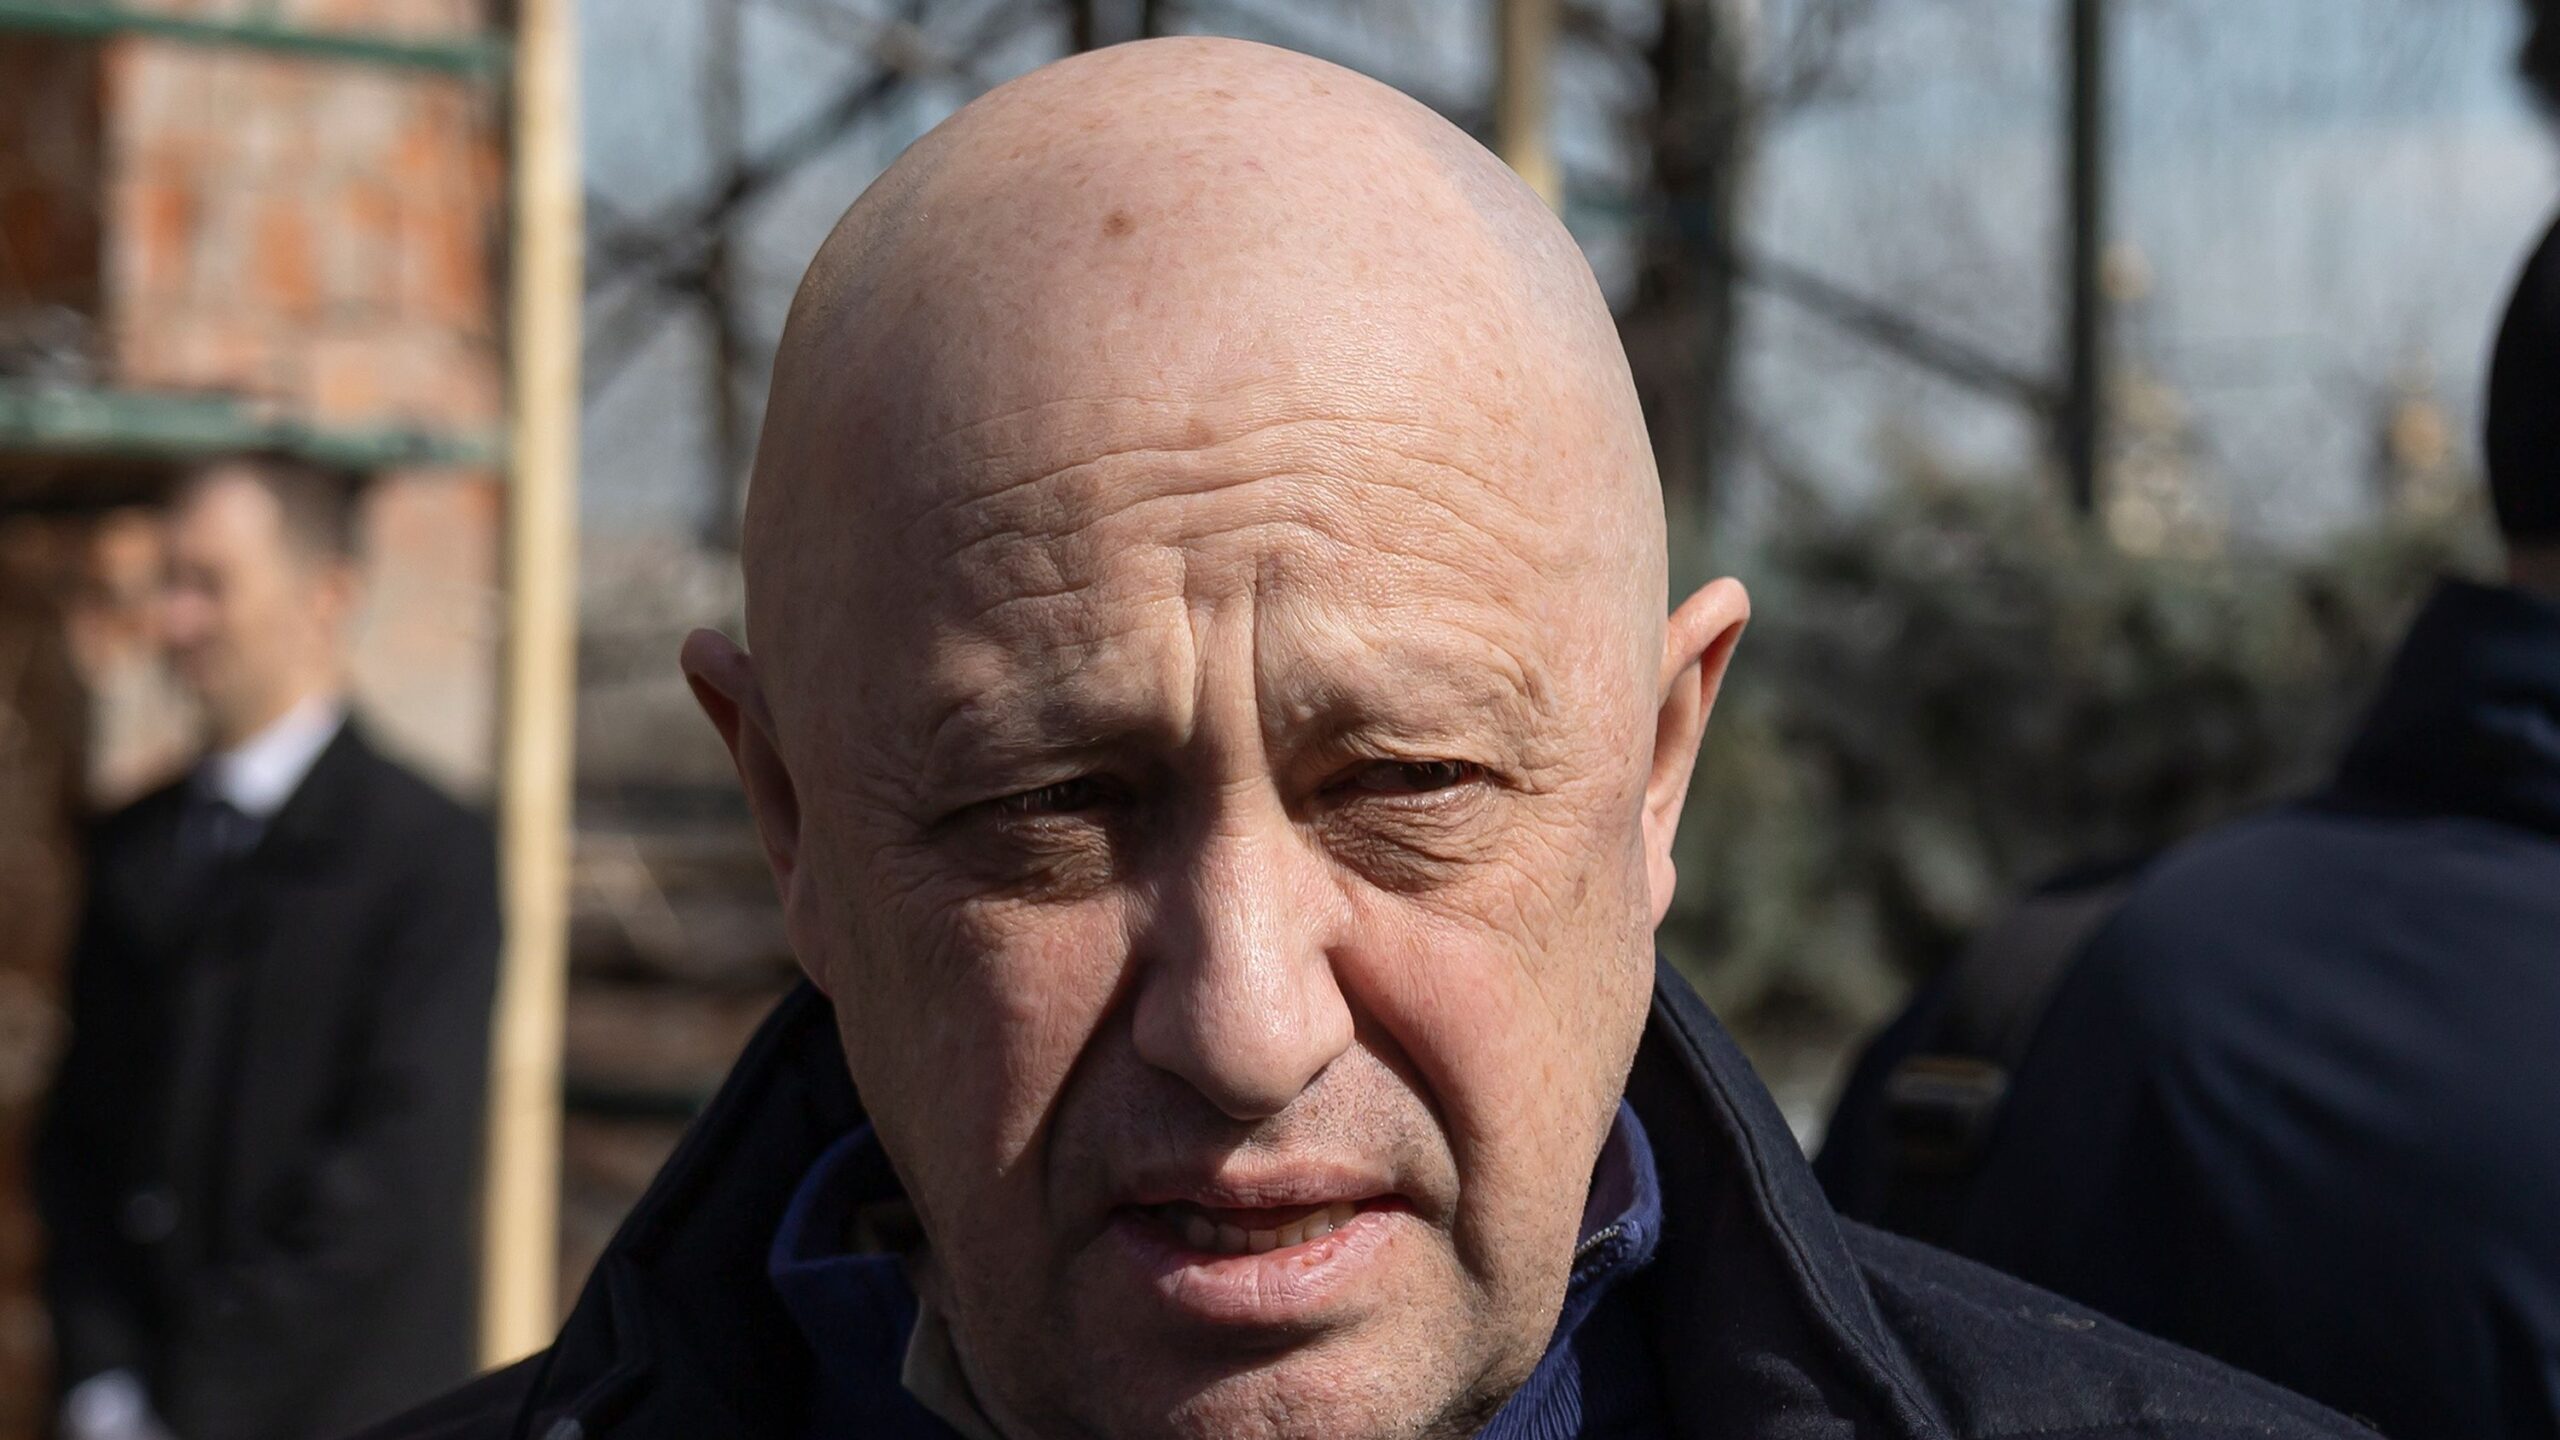 The fate of Wagner private mercenary group founder Yevgeny Prigozhin was unclear on the evening of ...